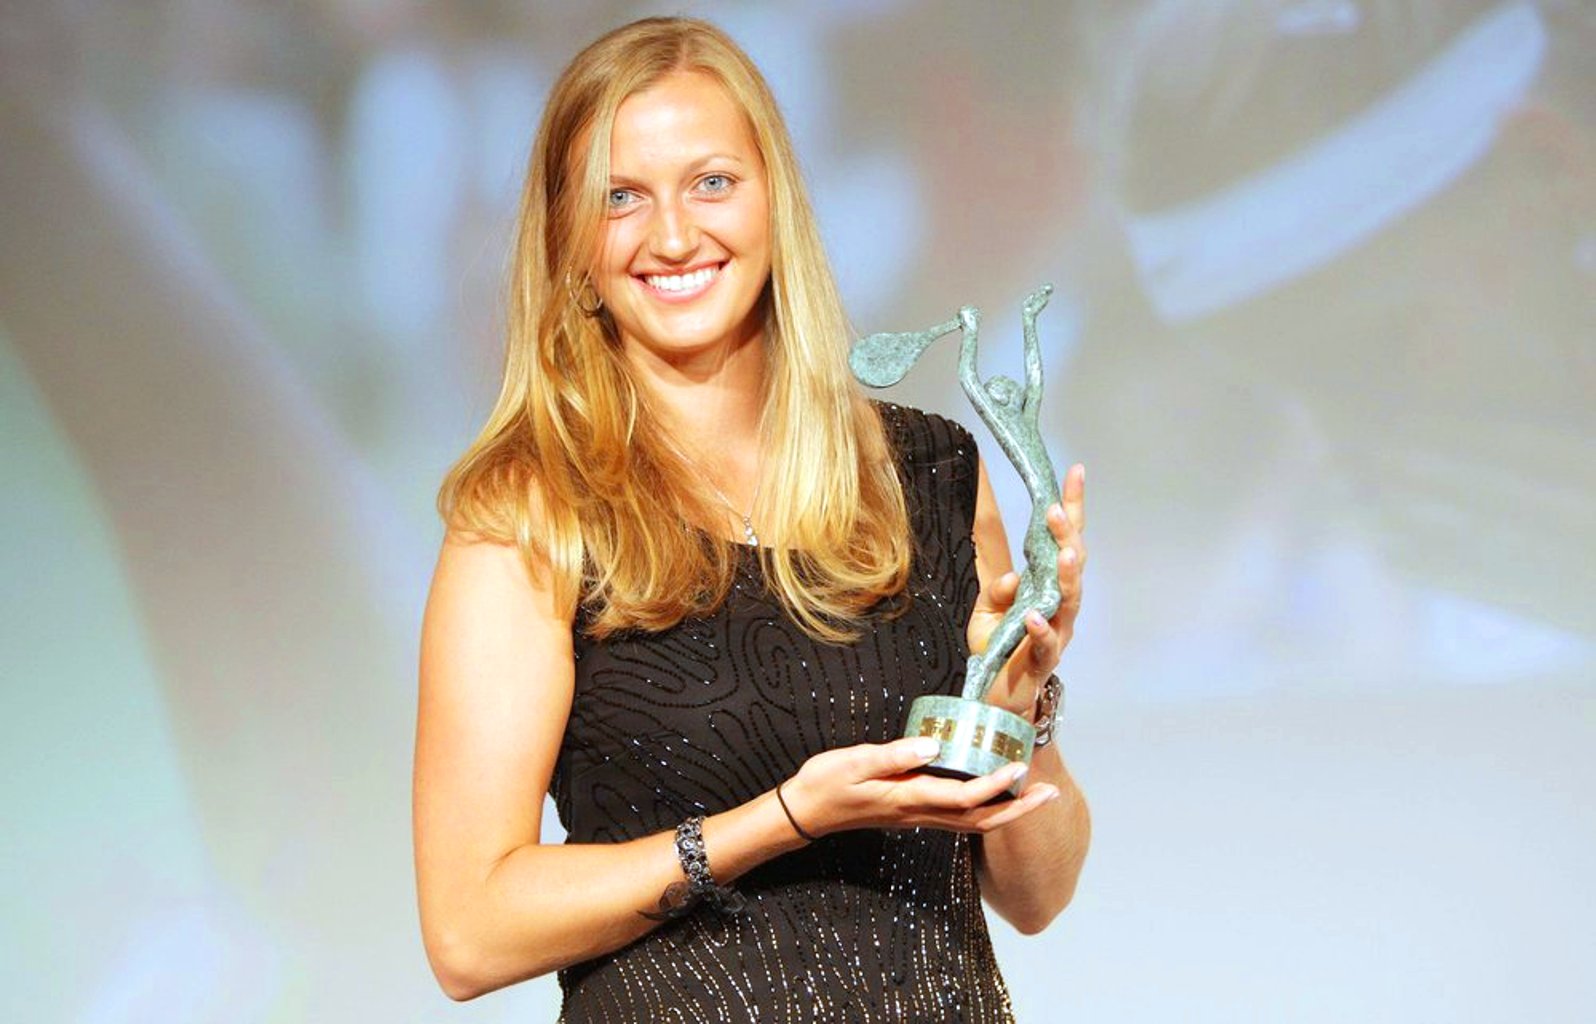  Petra Kvitova and trophy for best テニス player in last season